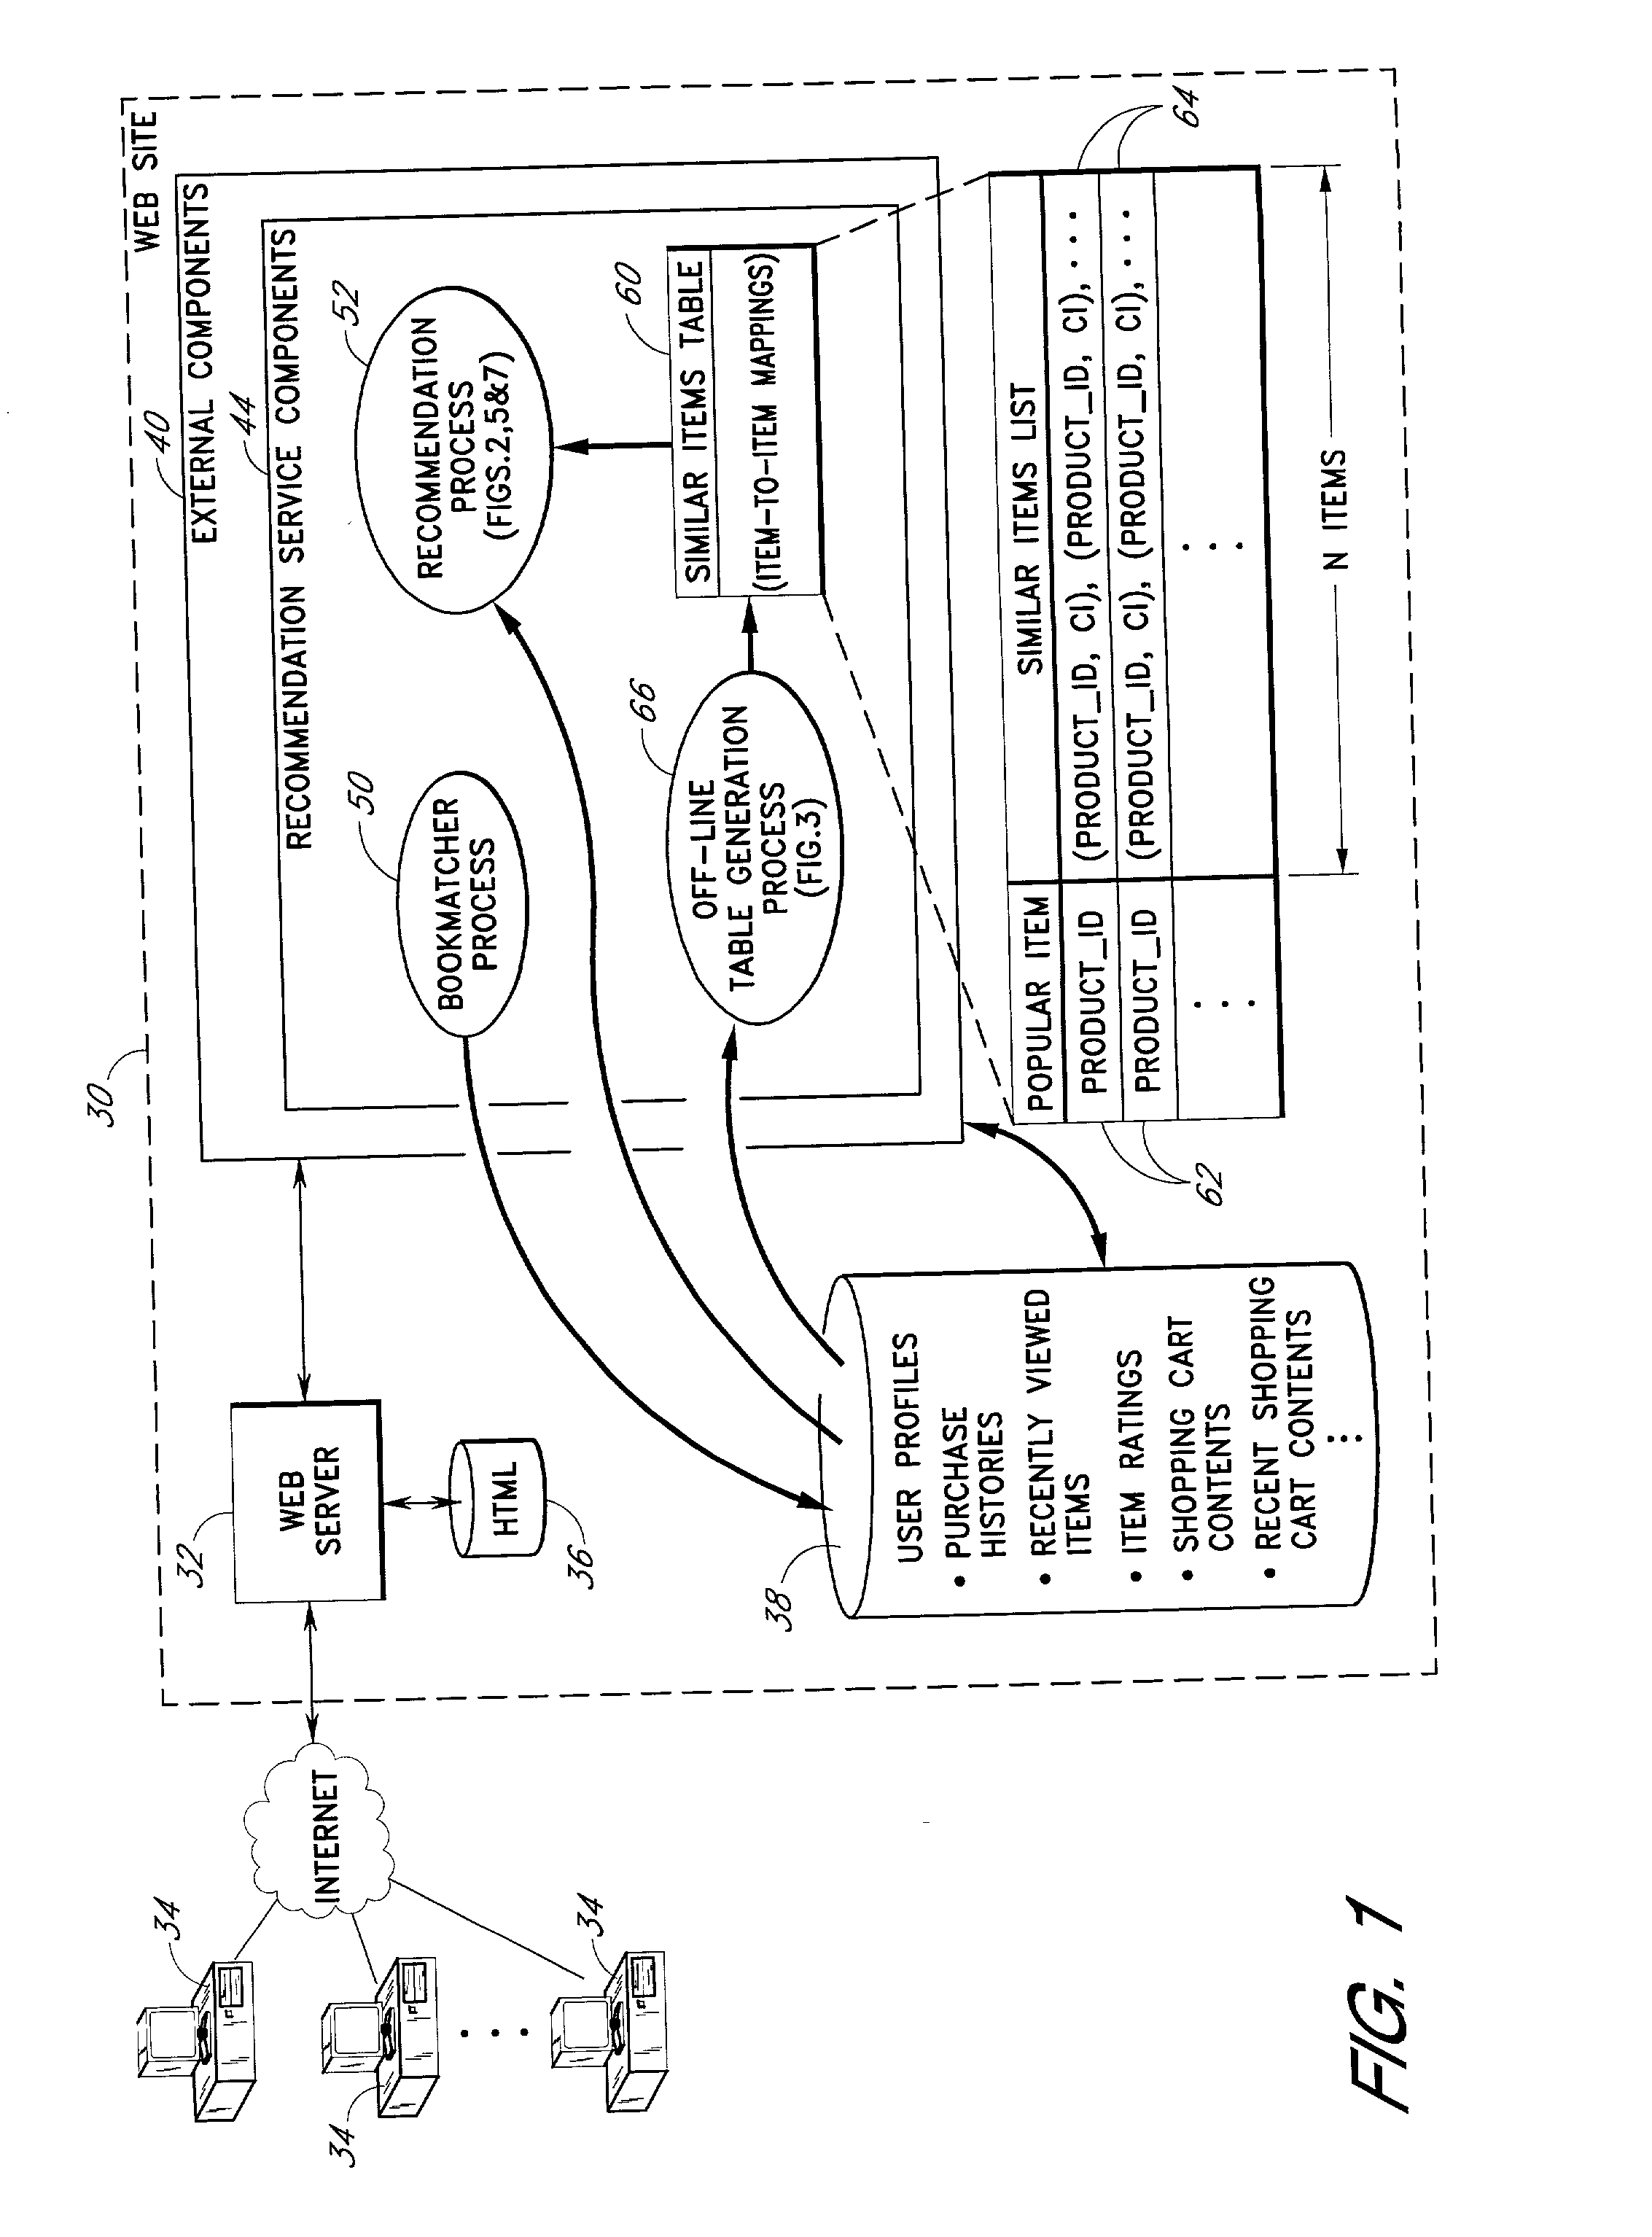 Content personalization based on actions performed during a current browsing session